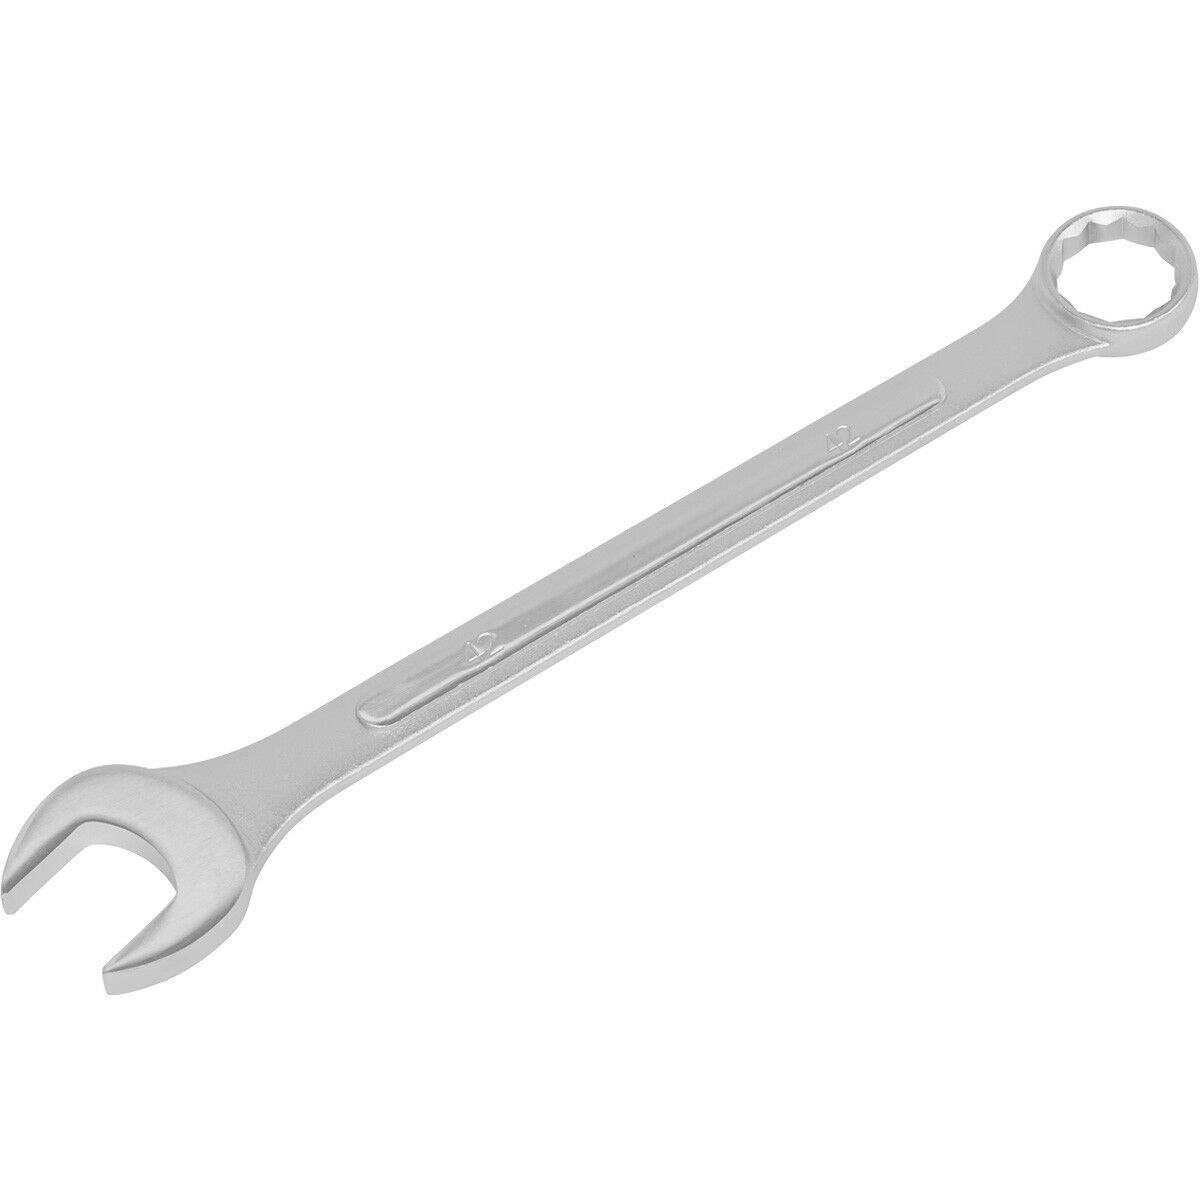 42mm Large Combination Spanner - Drop Forged Steel - Chrome Plated Polished Jaws